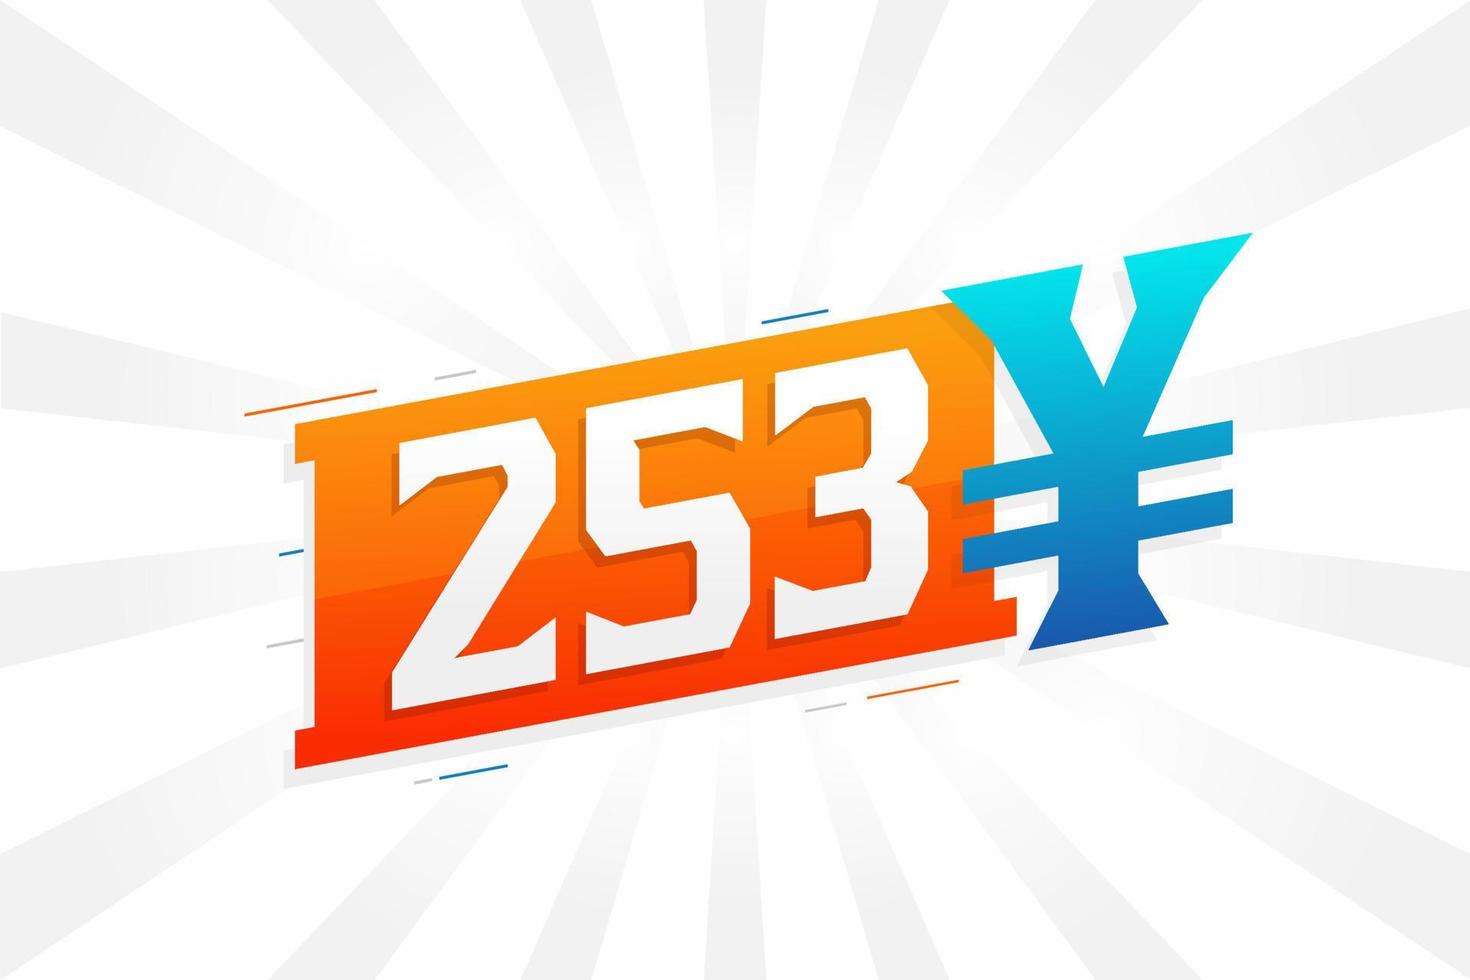 253 Yuan Chinese currency vector text symbol. 253 Yen Japanese currency Money stock vector